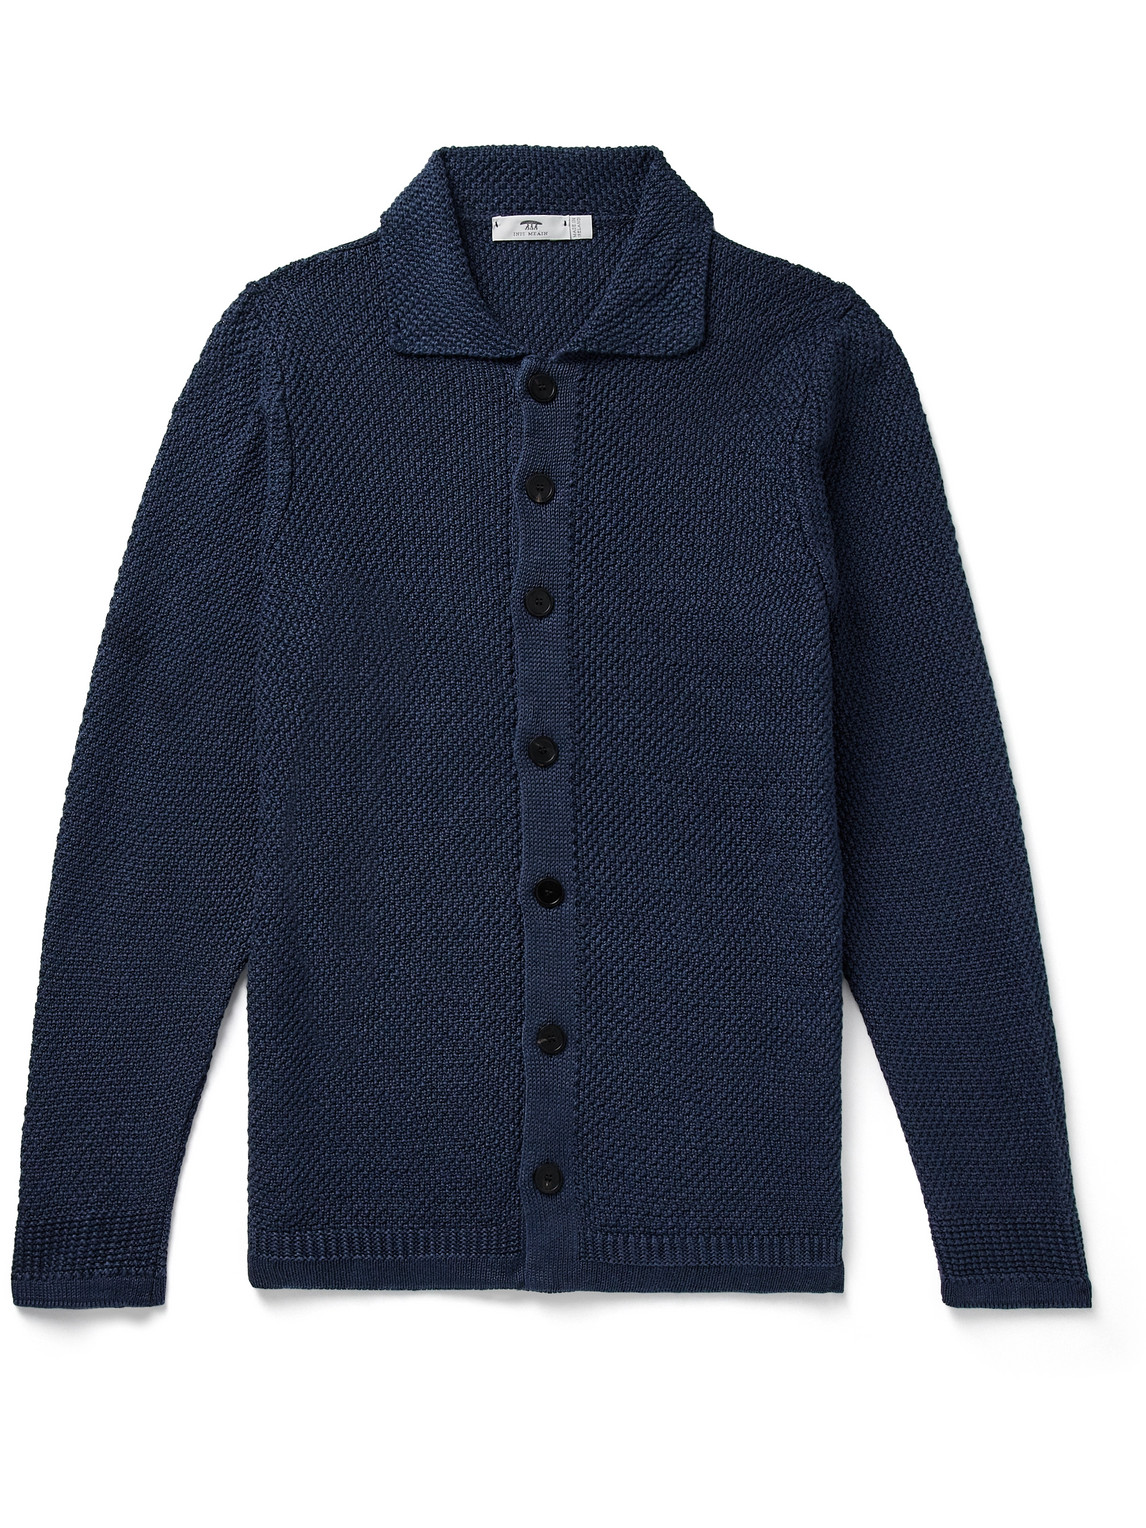 Inis Meain Linen Cardigan In Blue